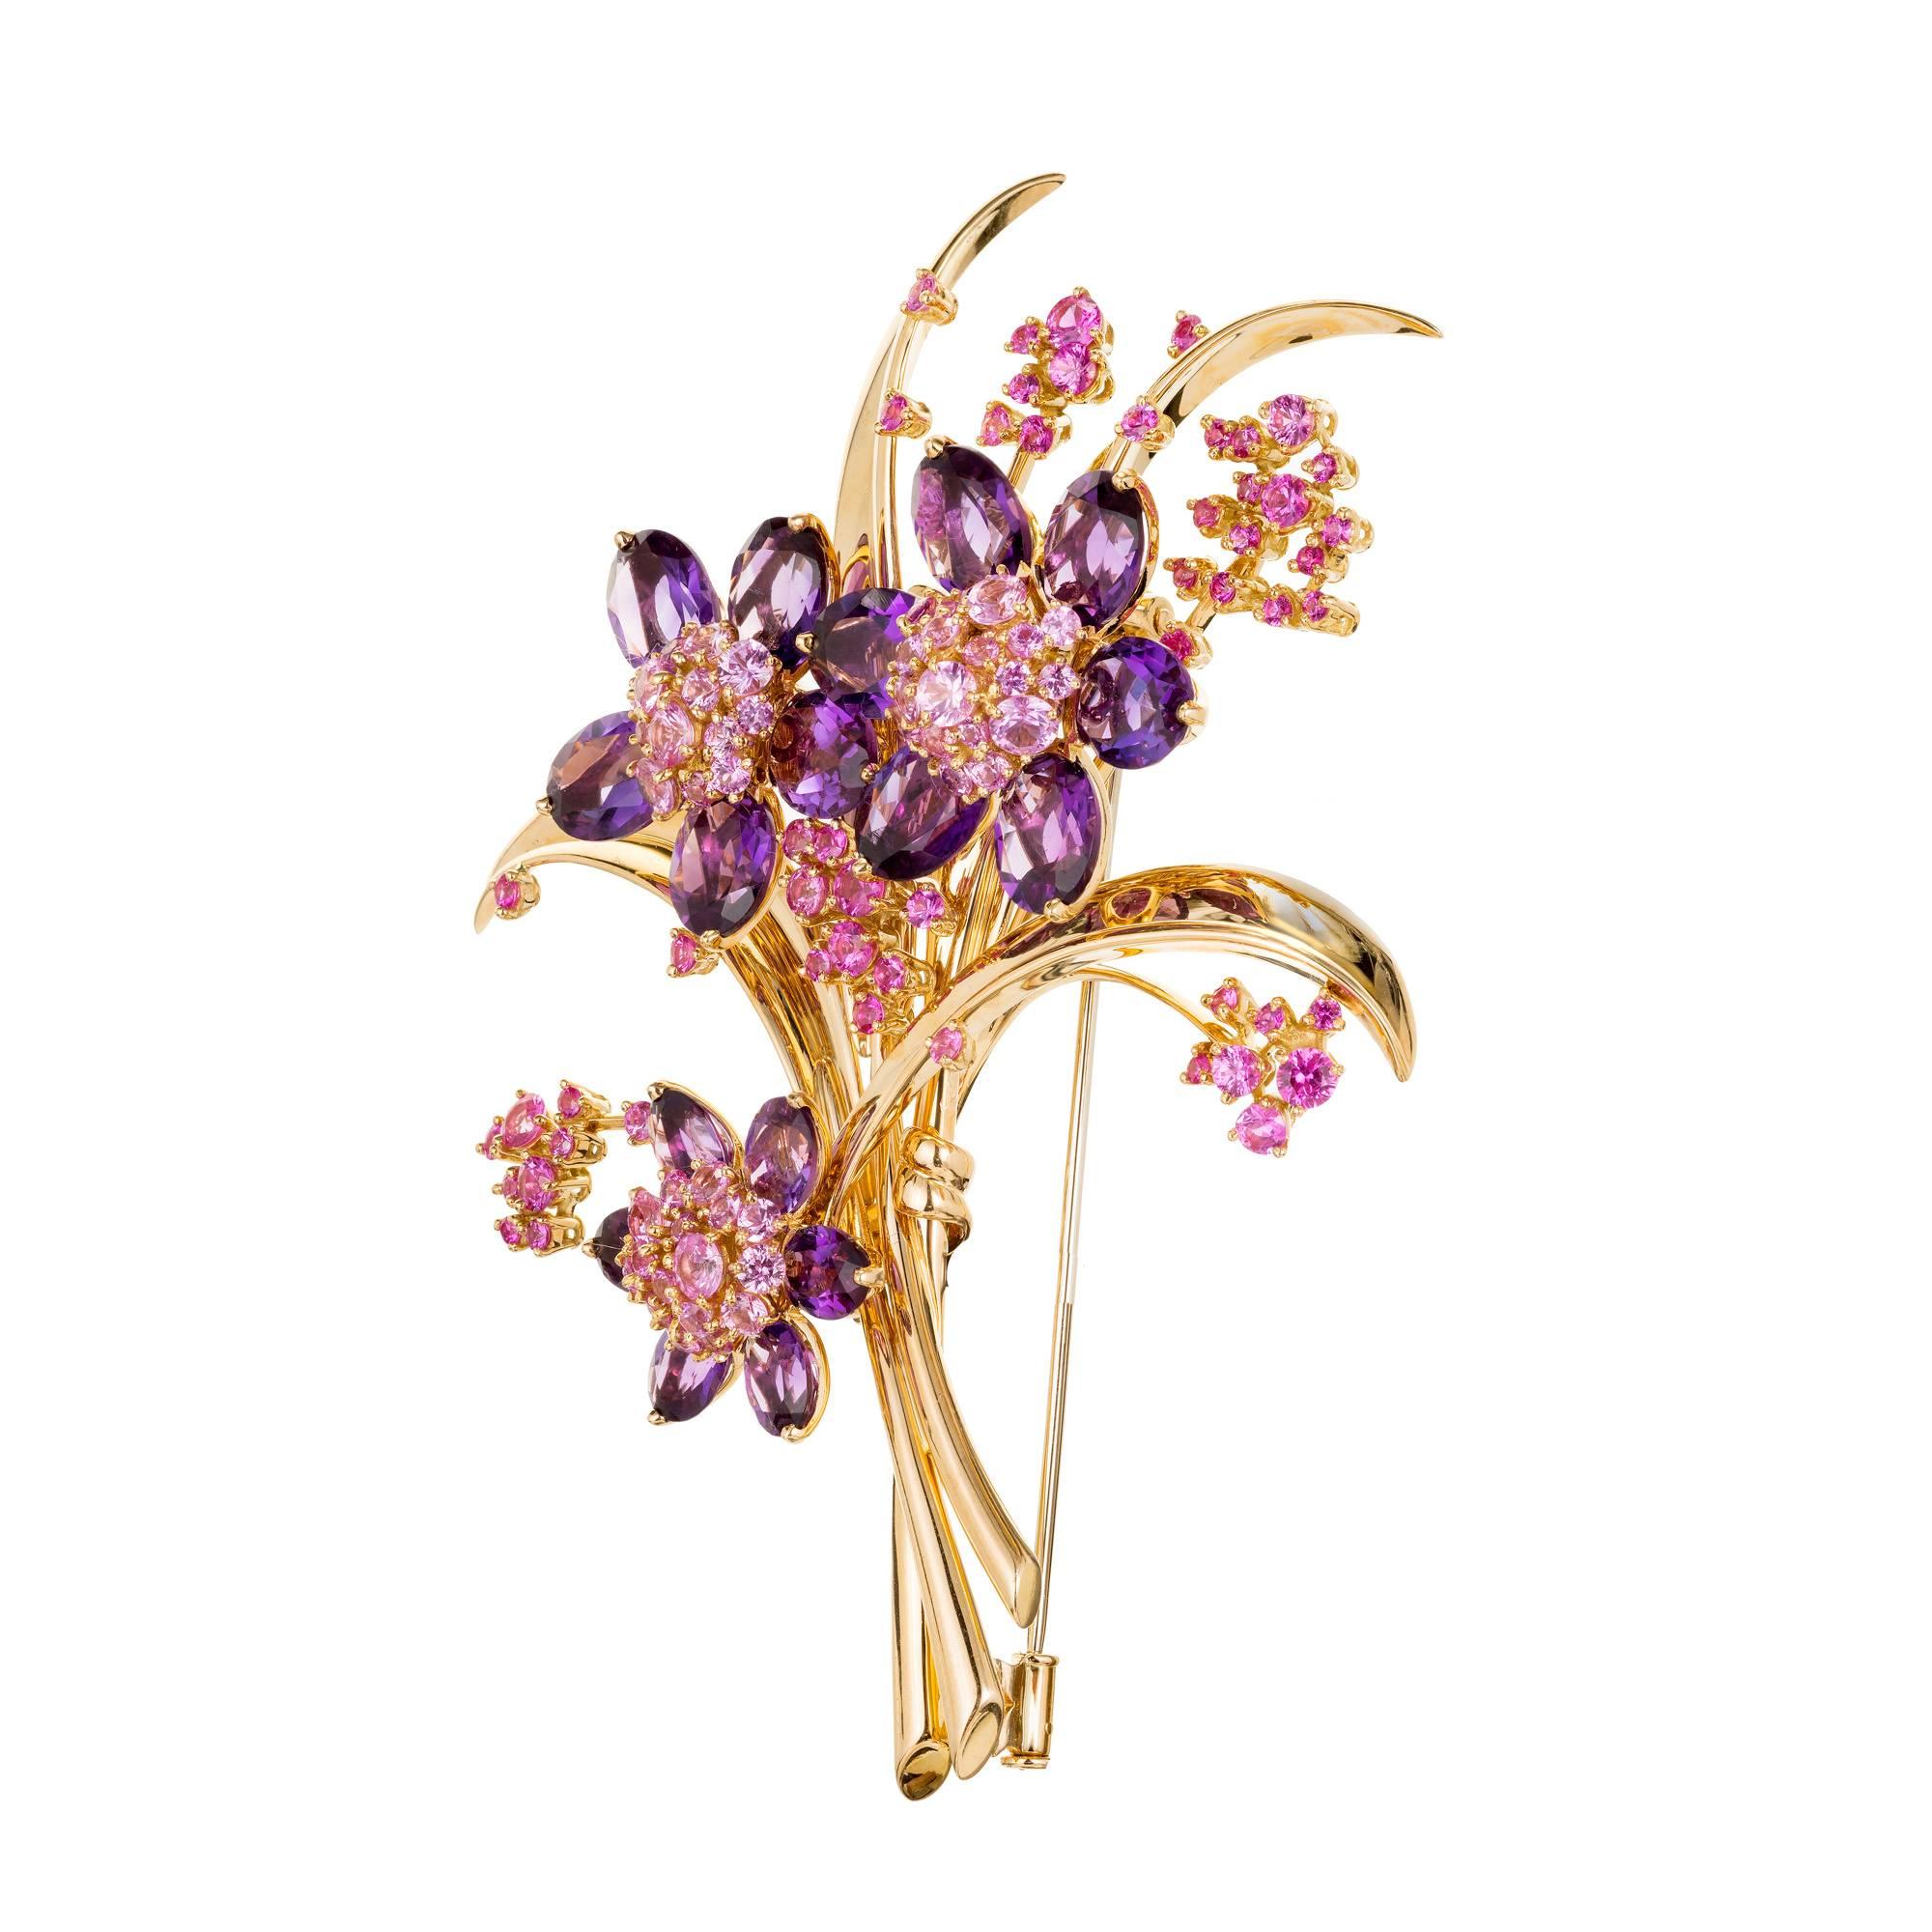 Van Cleef and Arpels Hawaii Bouquet Brooch. Designed as a large triple flower pin with Approximately 8.00 carats of circular cut pink sapphires surrounded by oval shaped amethyst petals with long polished 18k gold shoots.

Pink Sapphire Approximate